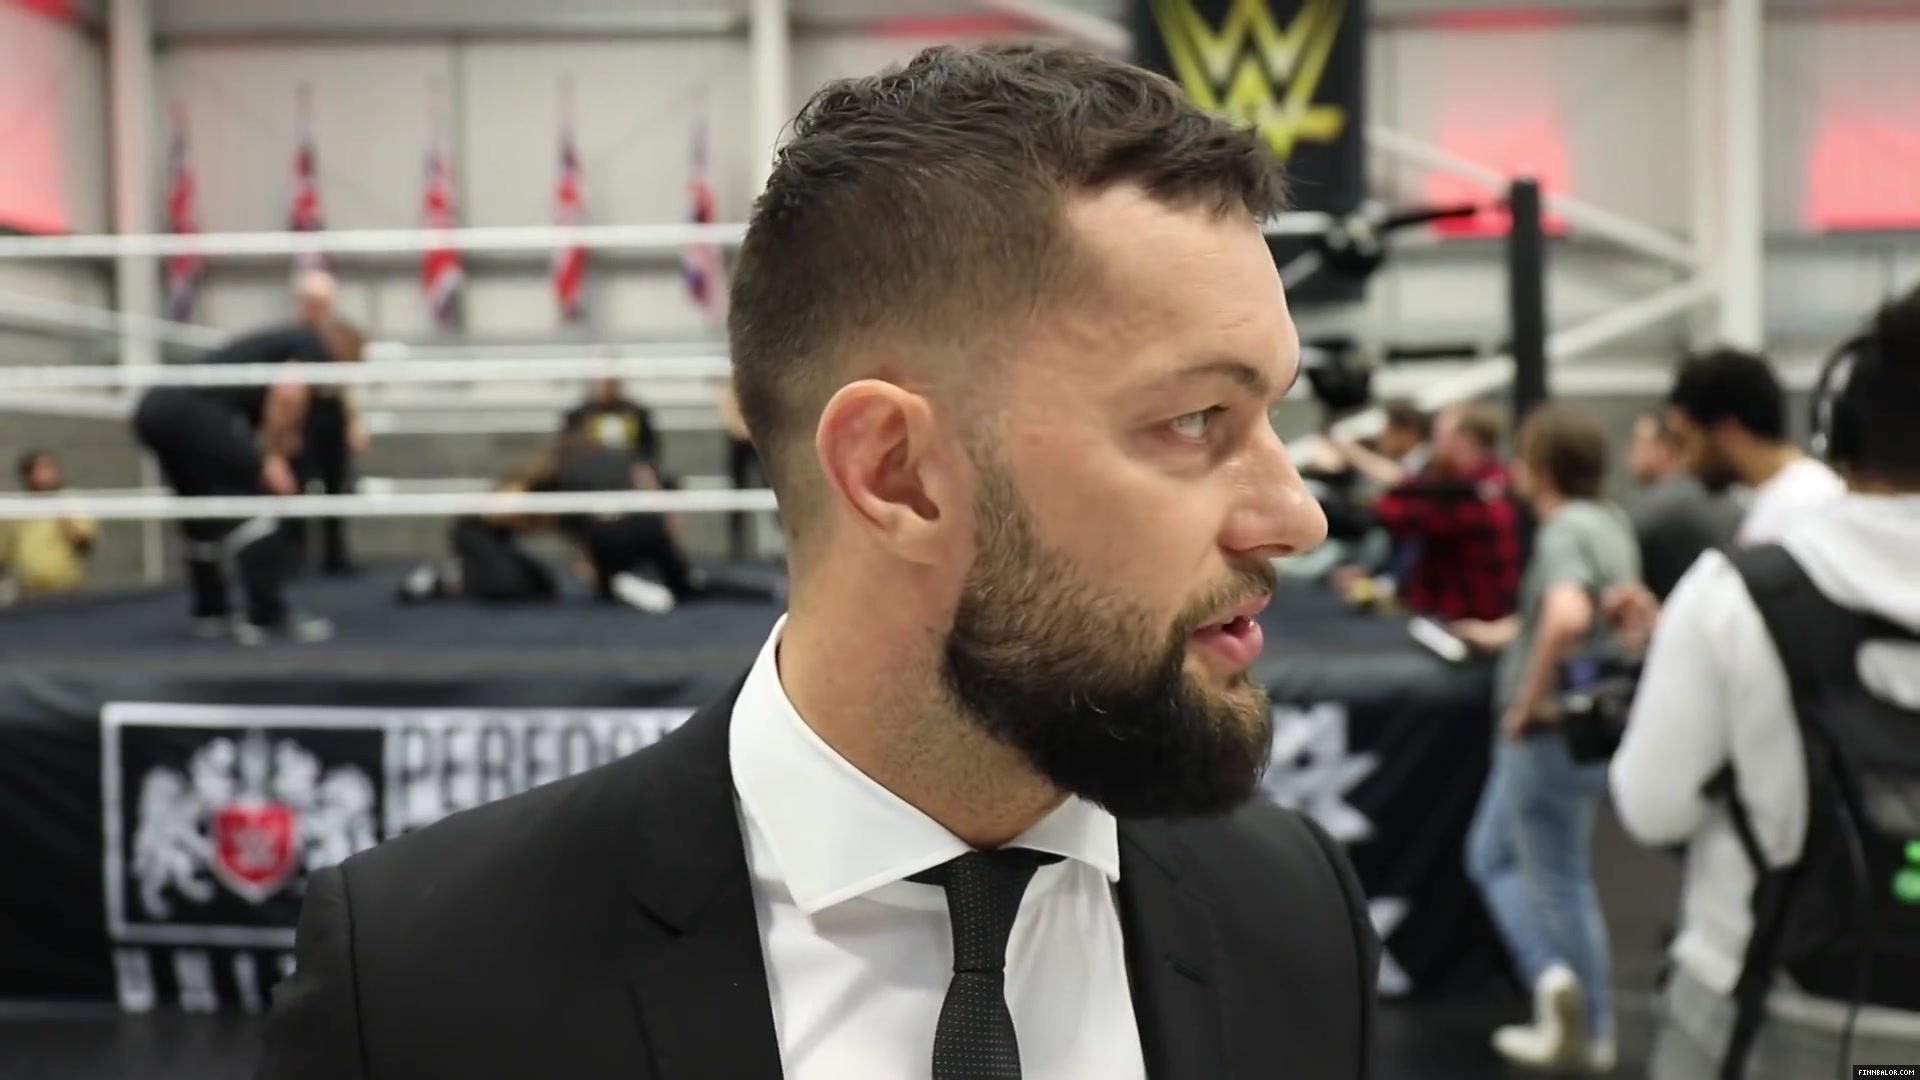 WWE_Superstar_FINN_BALOR_joins_MOUSTACHE_MOUNTAIN_at_the_opening_of_the_NXT_UK_PC_141.jpg